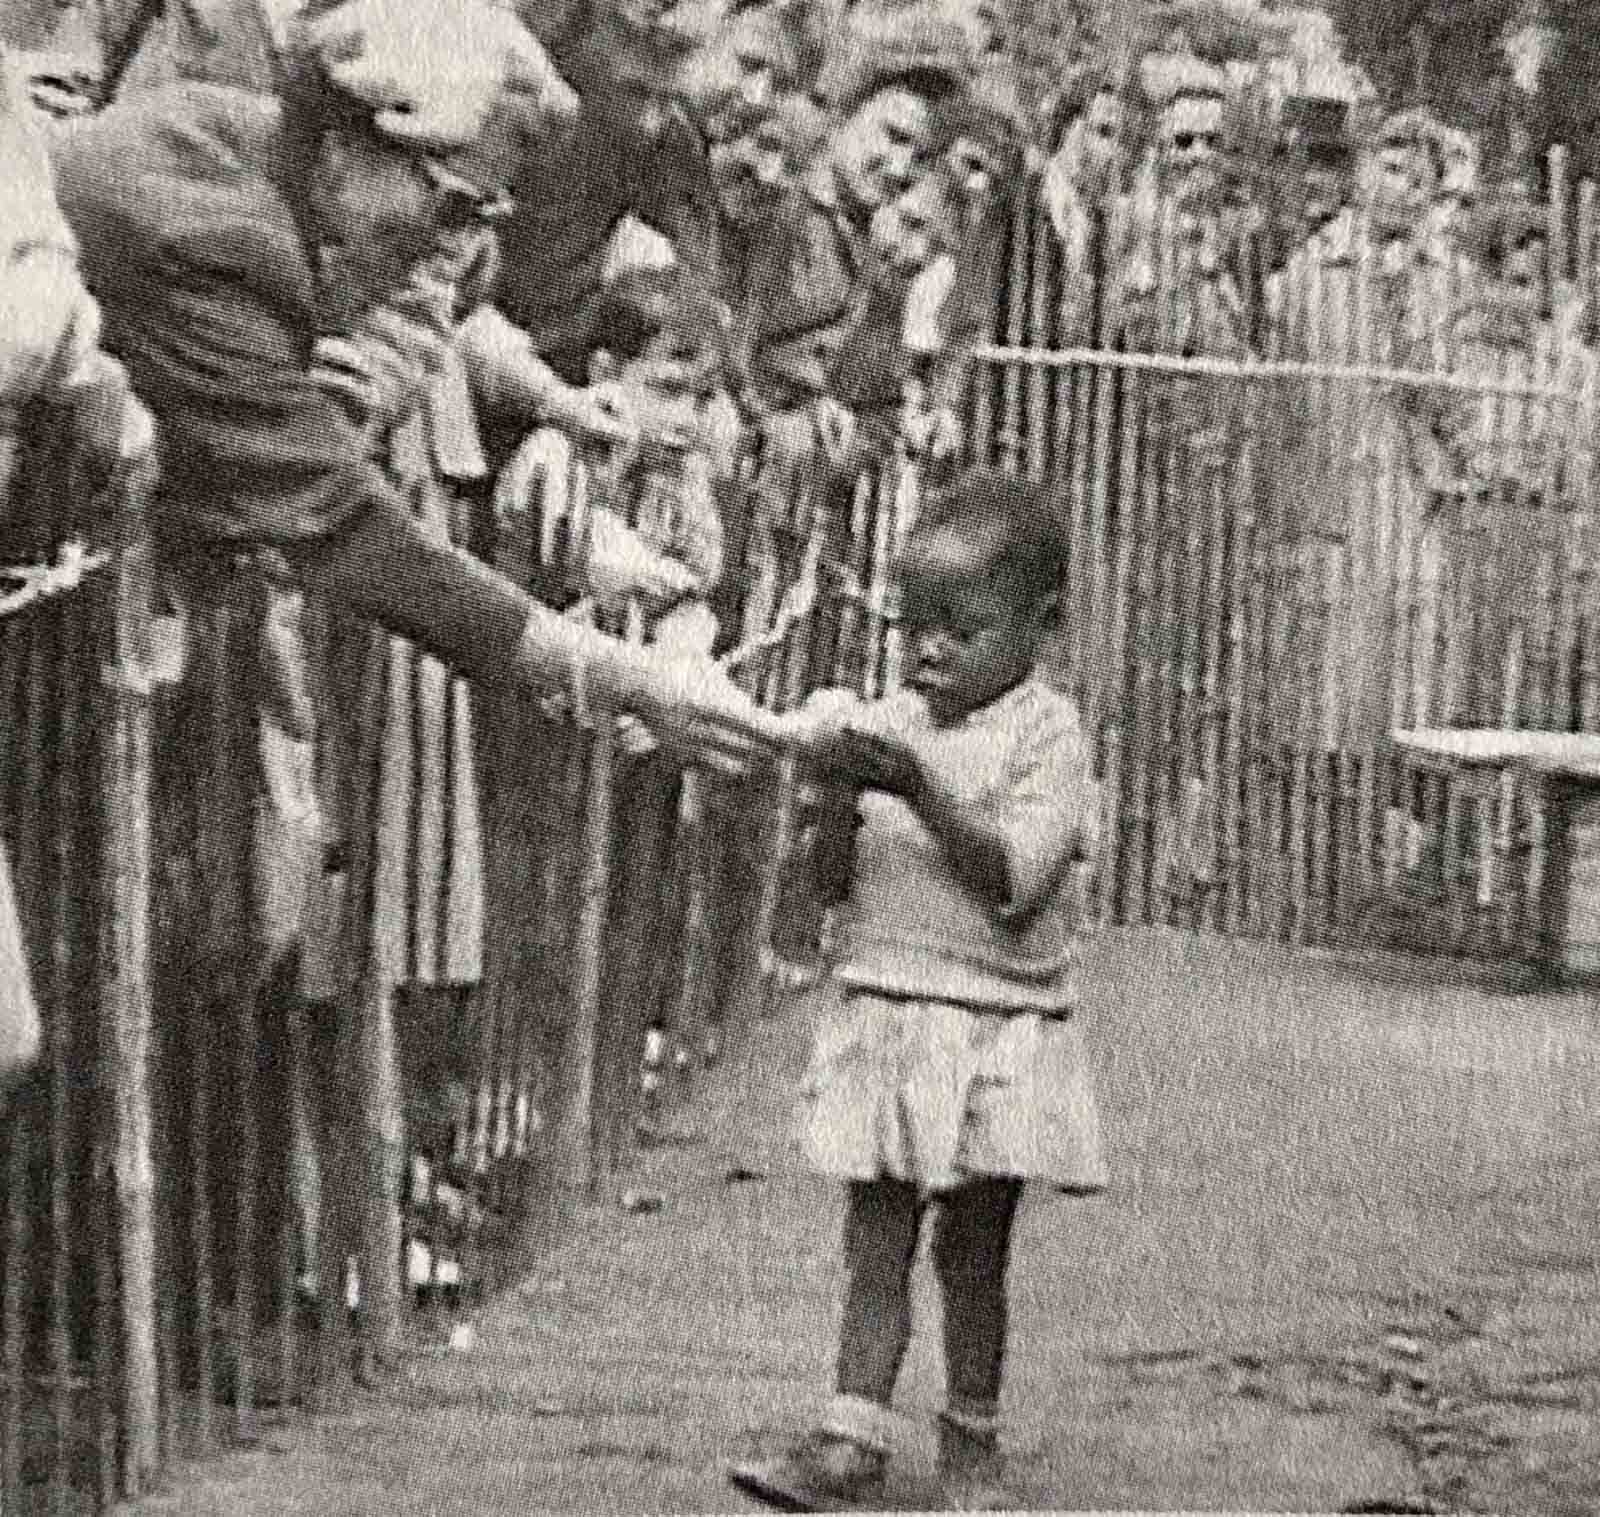 An African girl at the 1958 Expo in Brussels, Belgium that featured a ‘Congo Village’ with visitors watching her from behind wooden fences.